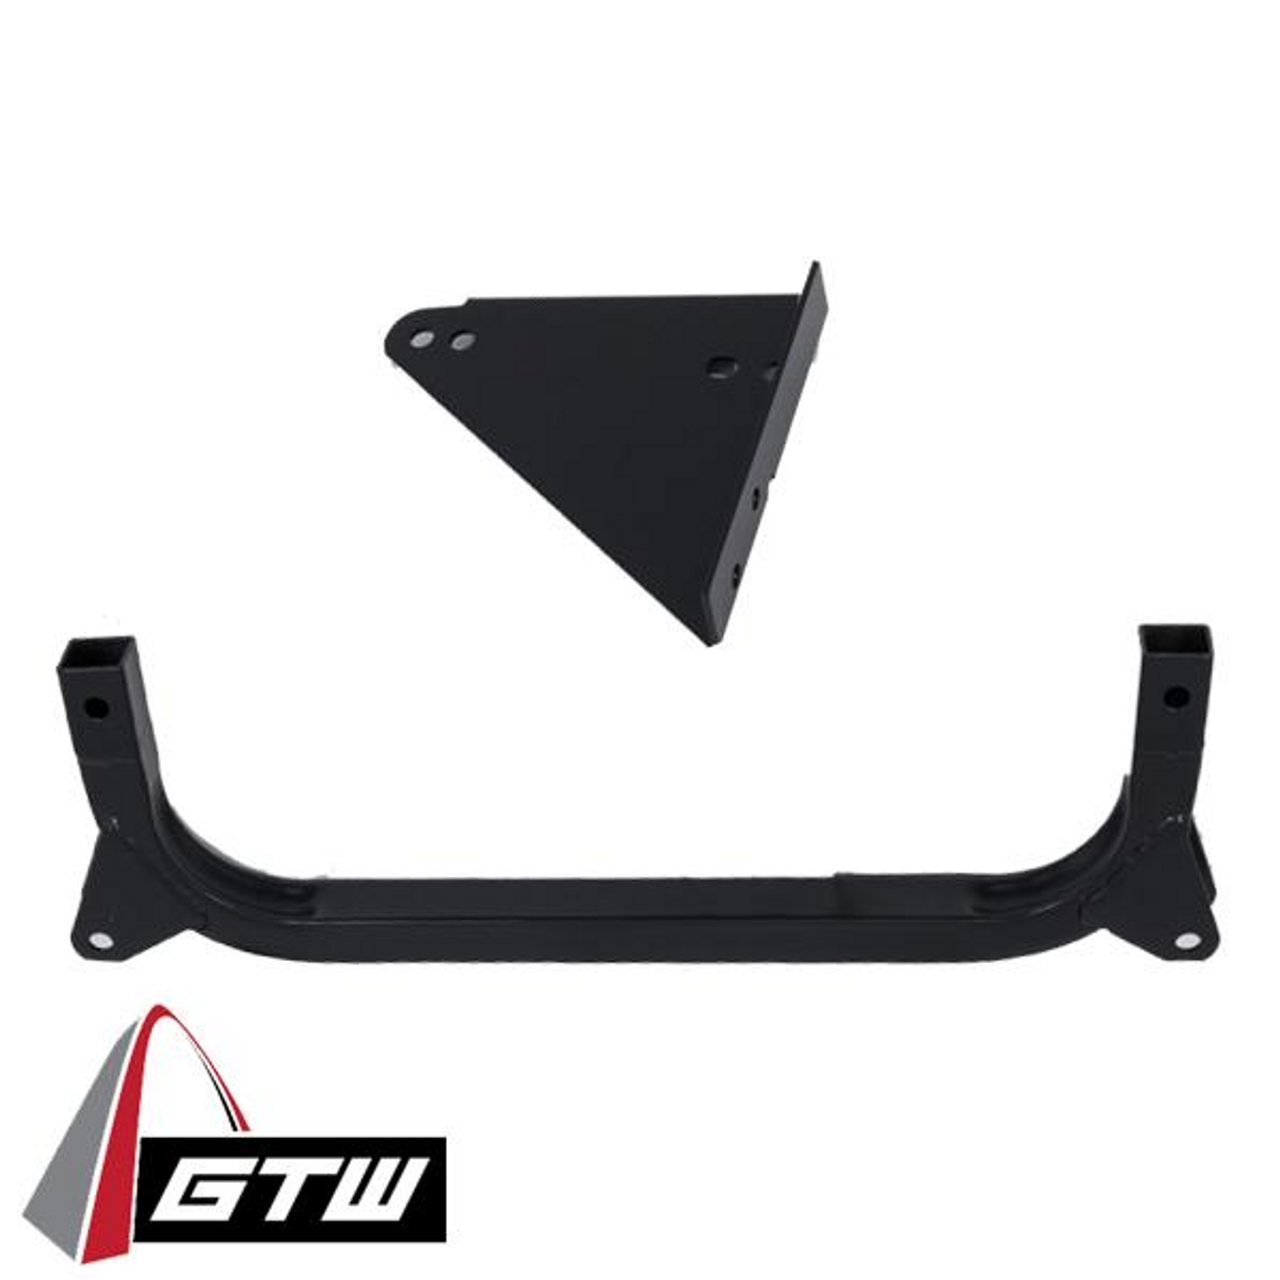 GTW Rear Lift Brackets for Yamaha Drive2 (Fits 2017-Up), 16-024